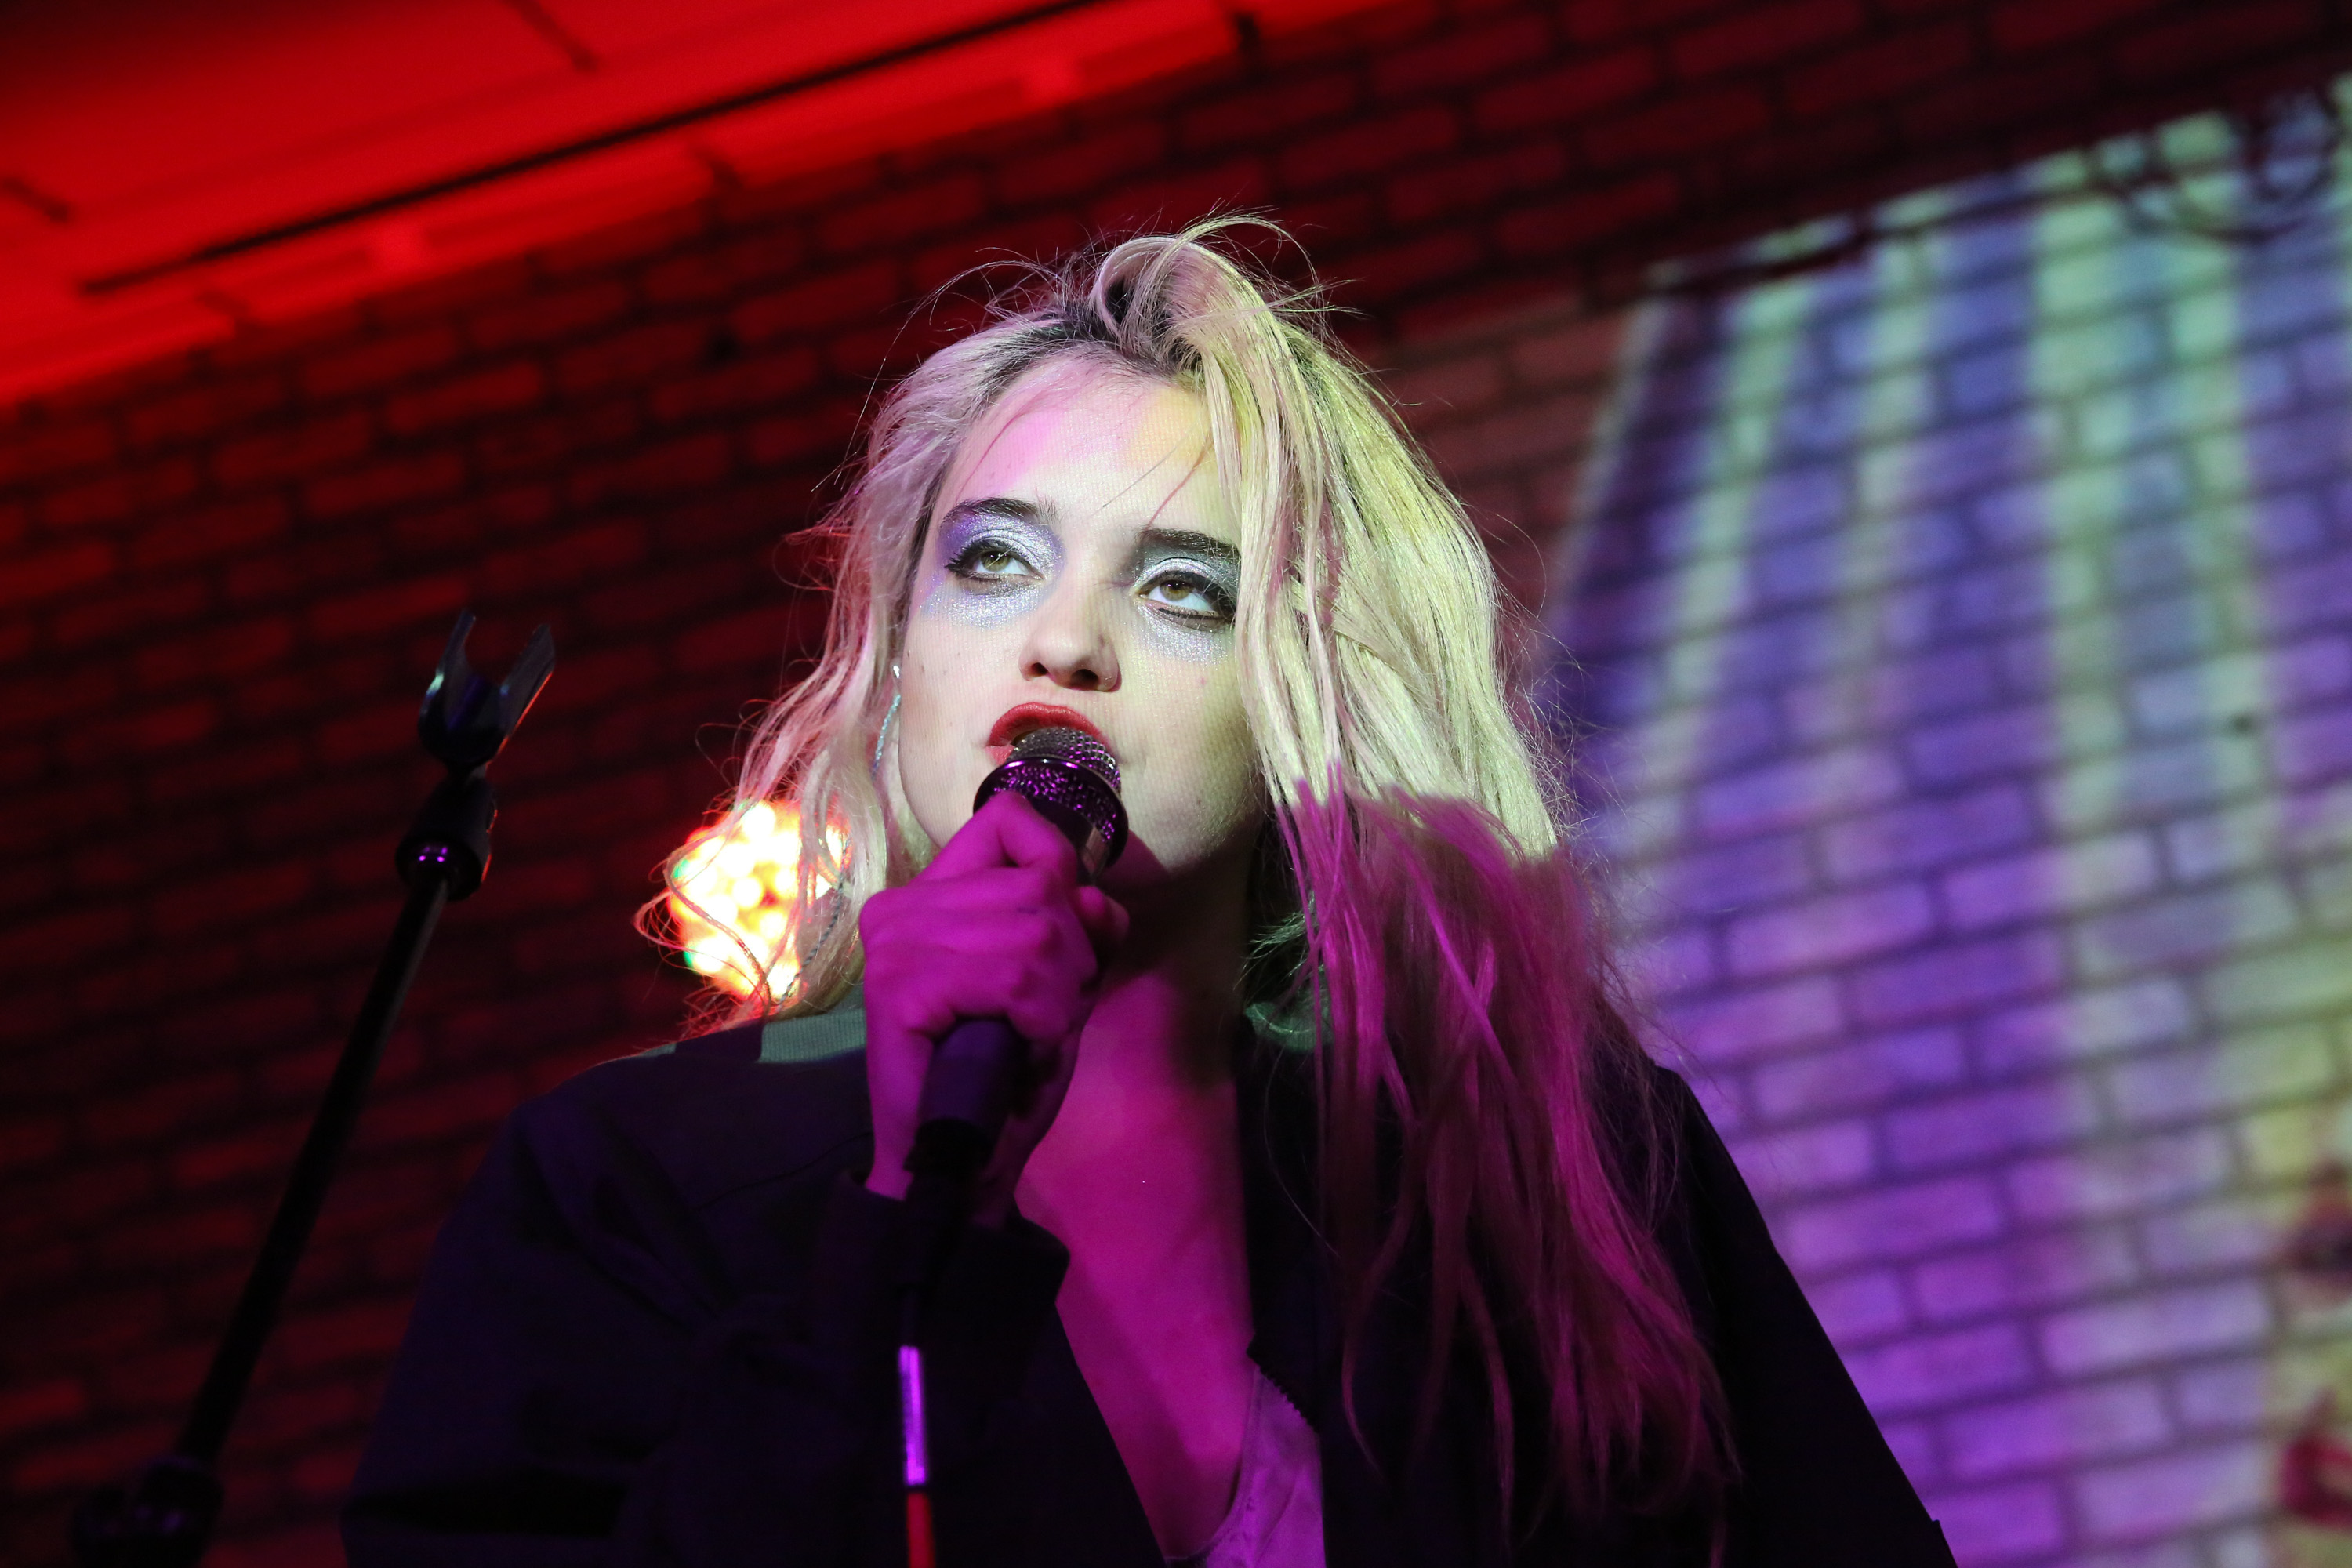 Sky Ferreira sky-ferreira NEW YORK, NY - APRIL 22: Sky Ferreira performs in concert at SHOT! The Psycho-Spiritual Mantra of Rock After Party during the 2016 Tribeca Film Festival at The Gallery at Dream Downtown on April 22, 2016 in New York City. (Photo by Rob Kim/Getty Images for Tribeca Film Festival)